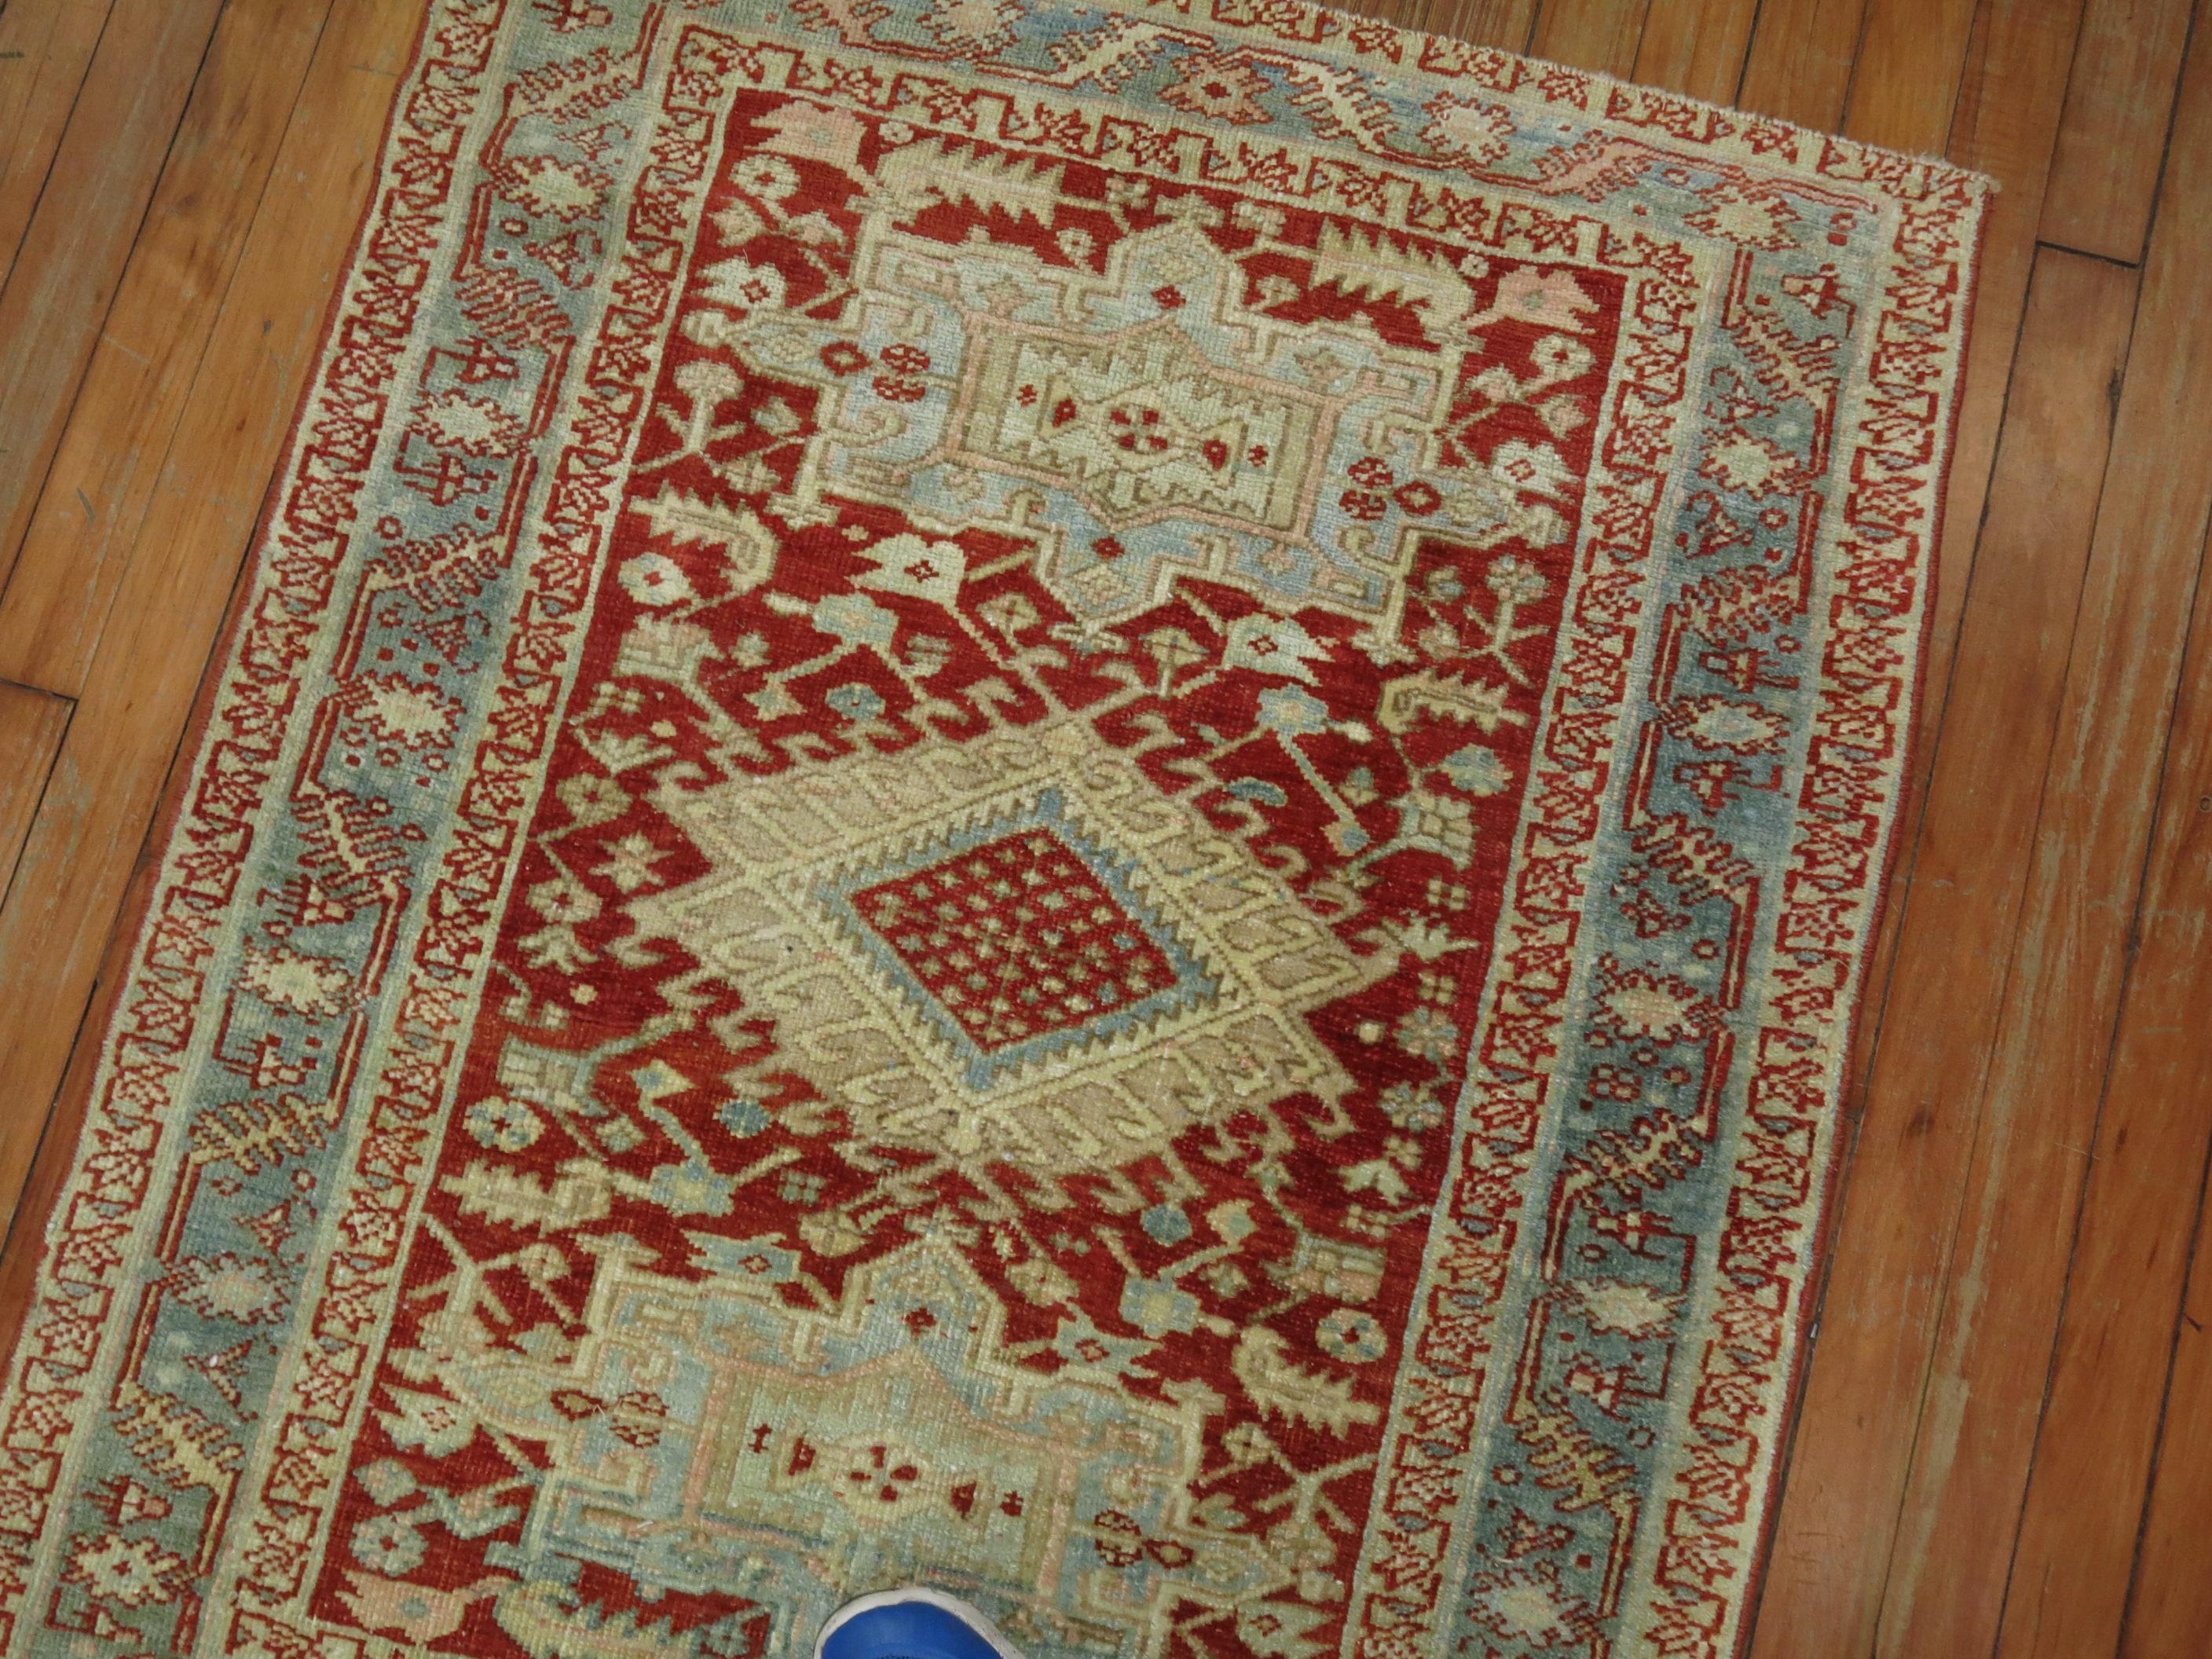 A colorful traditional oriental Persian Heriz Scatter size rug from the 1920s.

Measures: 2'9